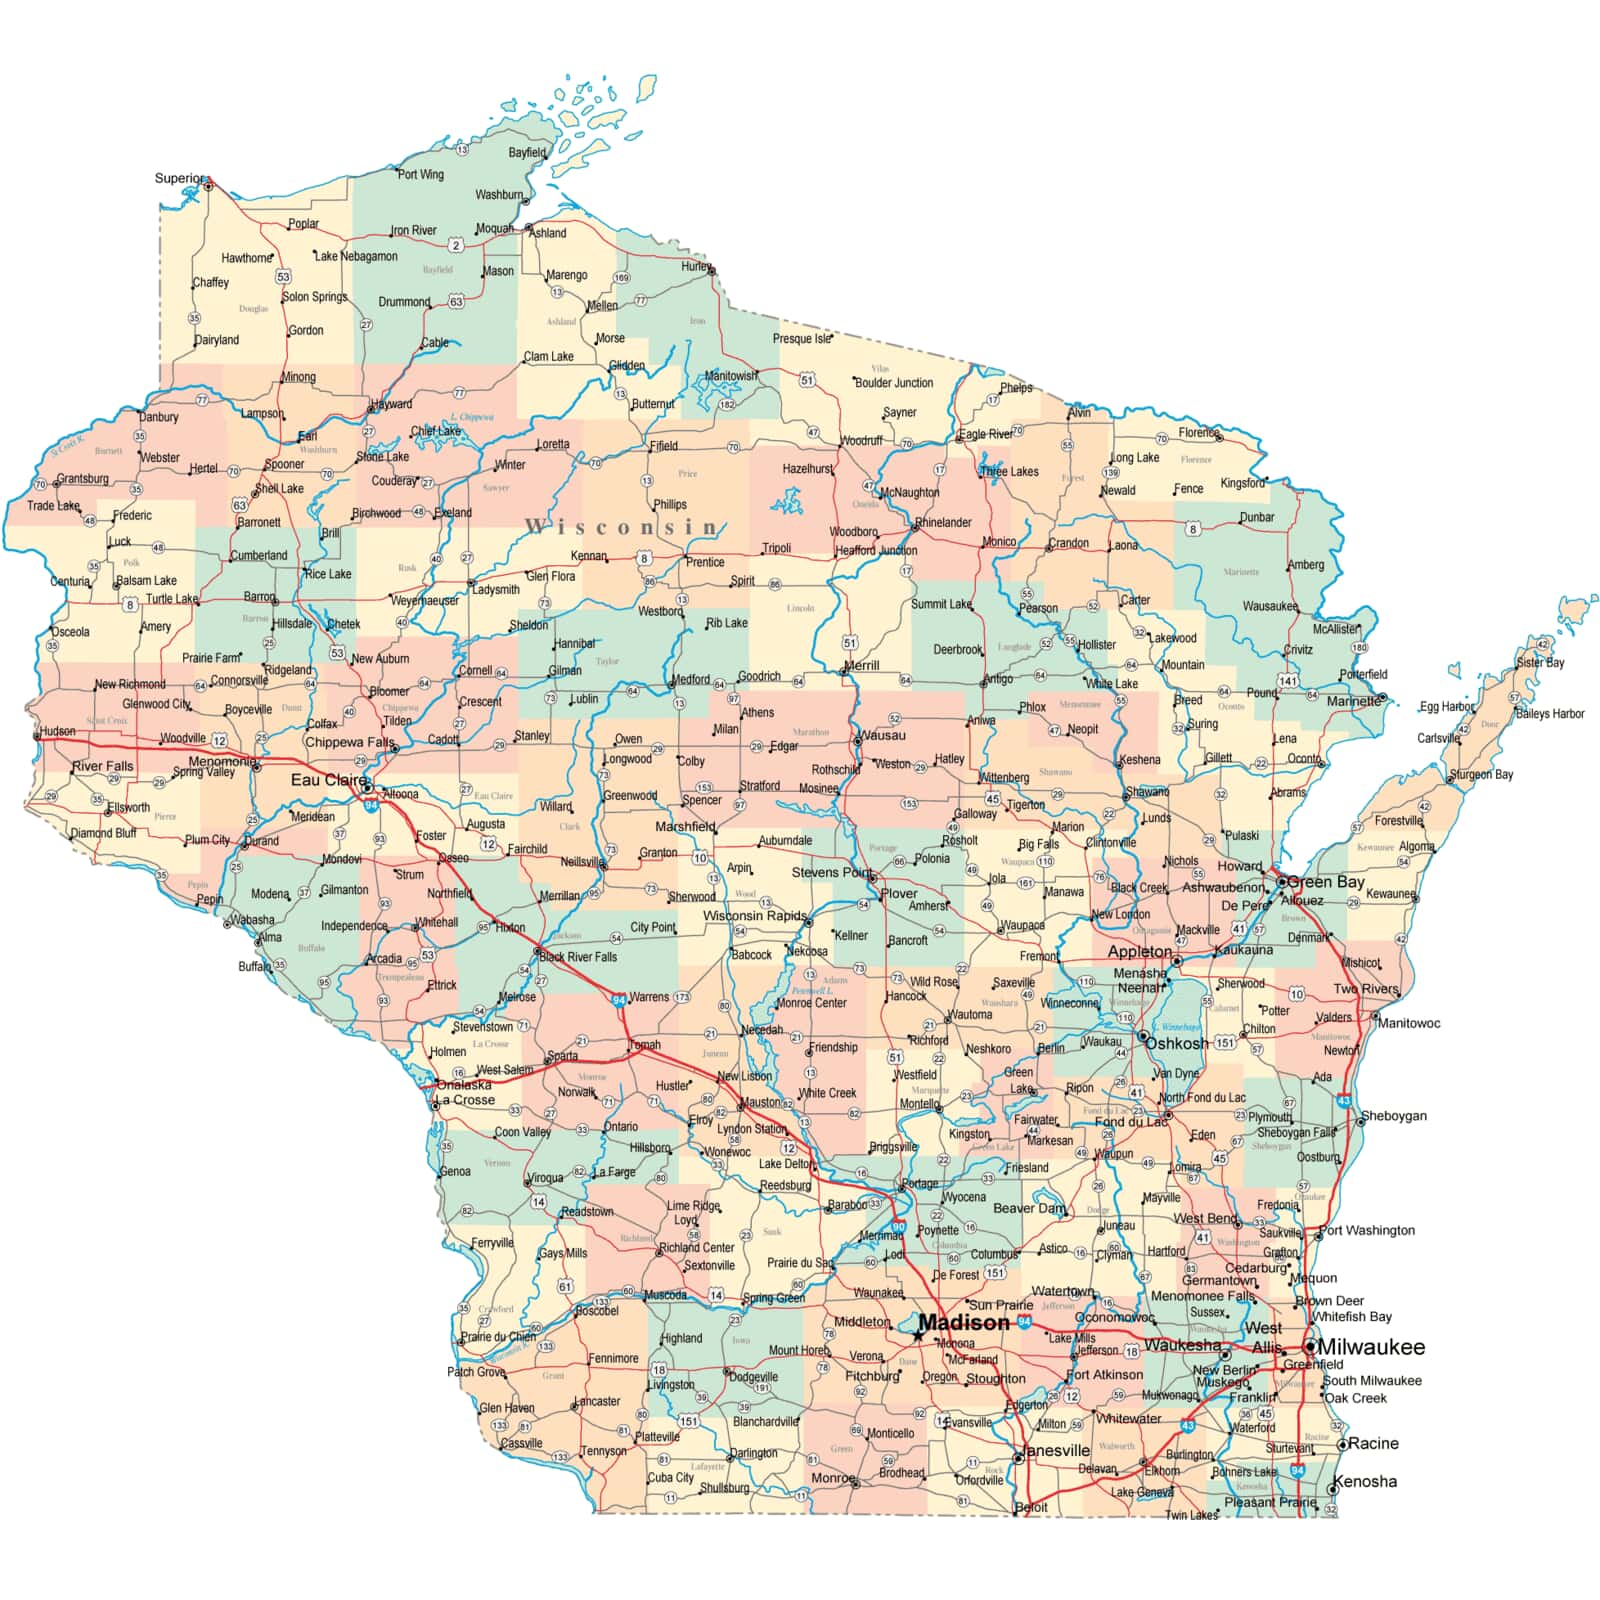 Wisconsin County Map With Highways Wisconsin Road Map   WI Road Map   Wisconsin Highway Map